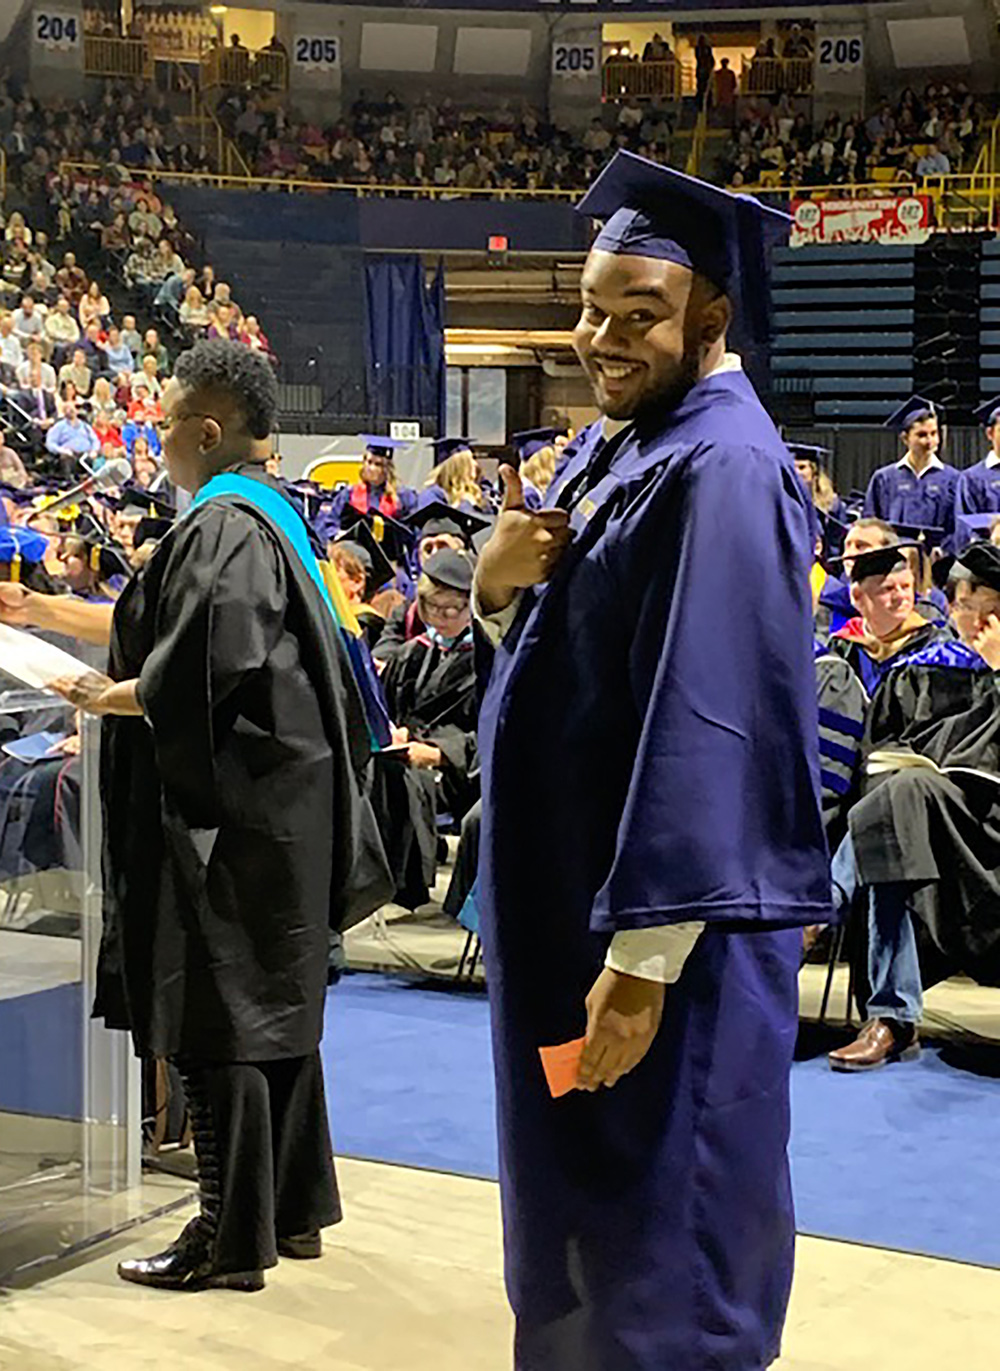 DeAndre Cole gives a thumbs up at the Winter 2019 commencement